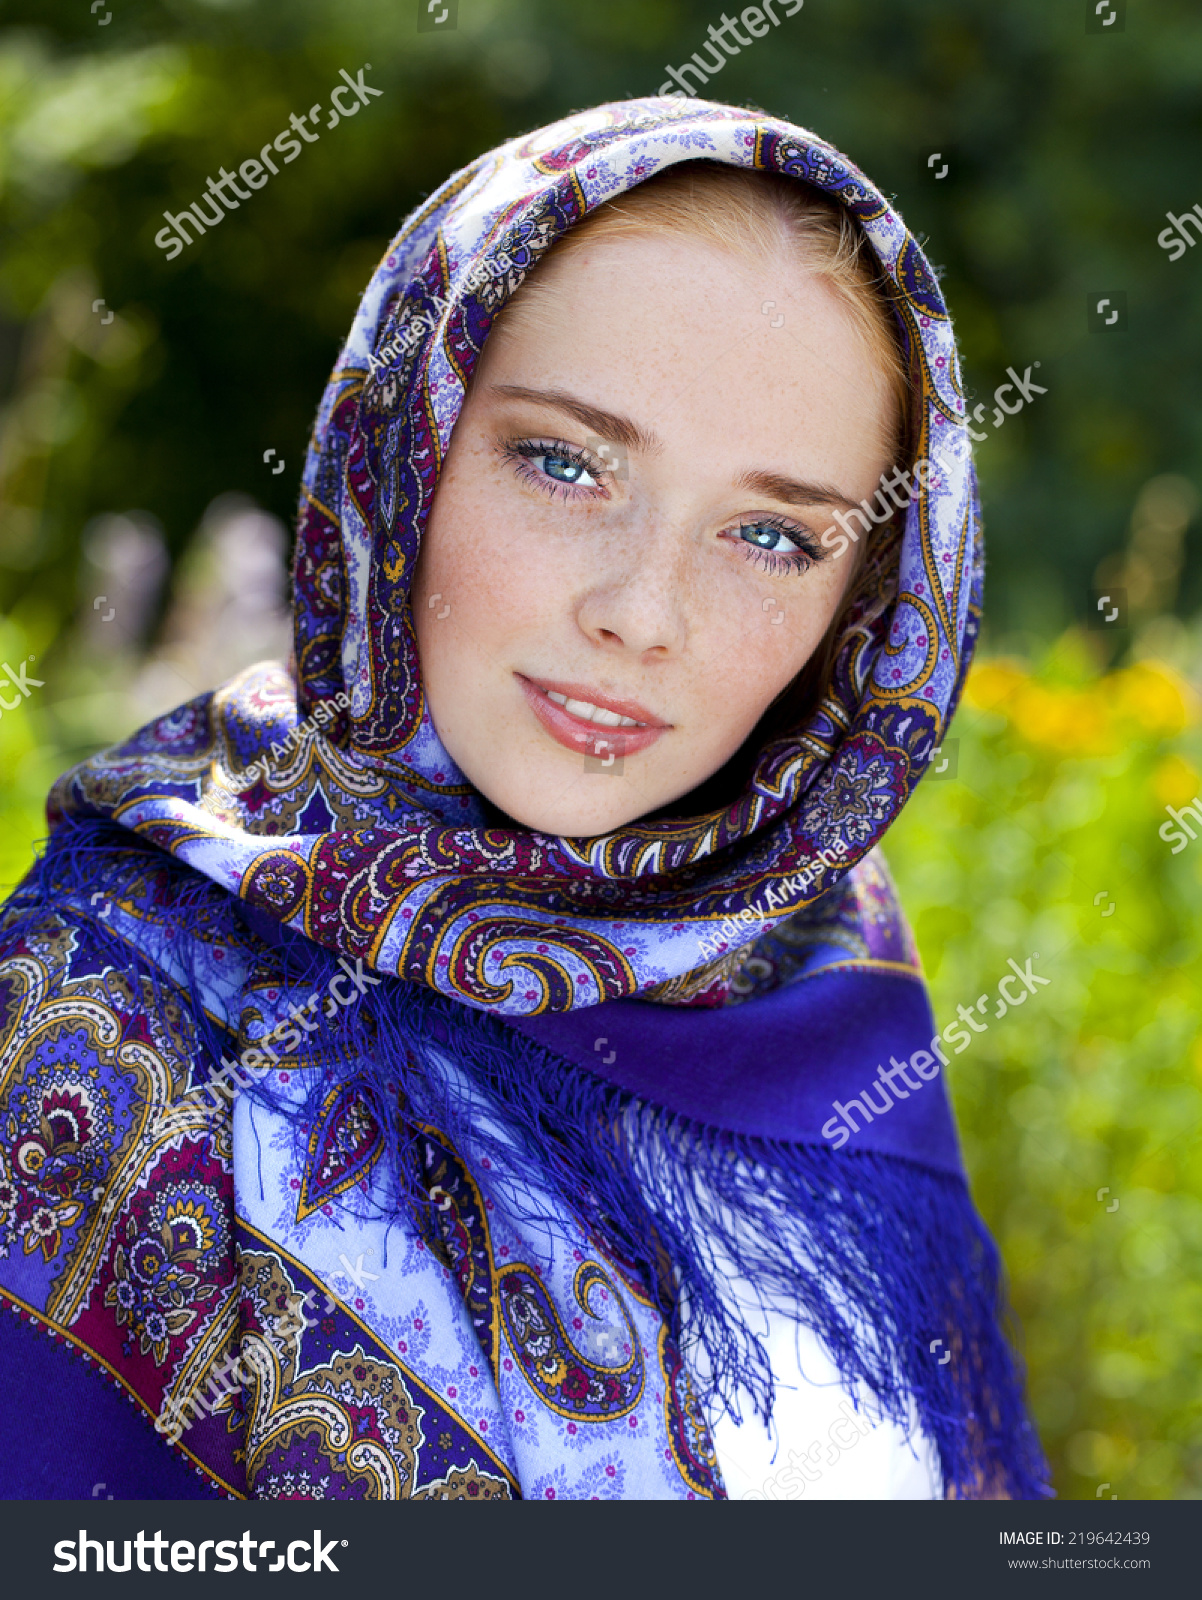 https://image.shutterstock.com/z/stock-photo-russian-beauty-woman-in-the-national-patterned-scarf-219642439.jpg